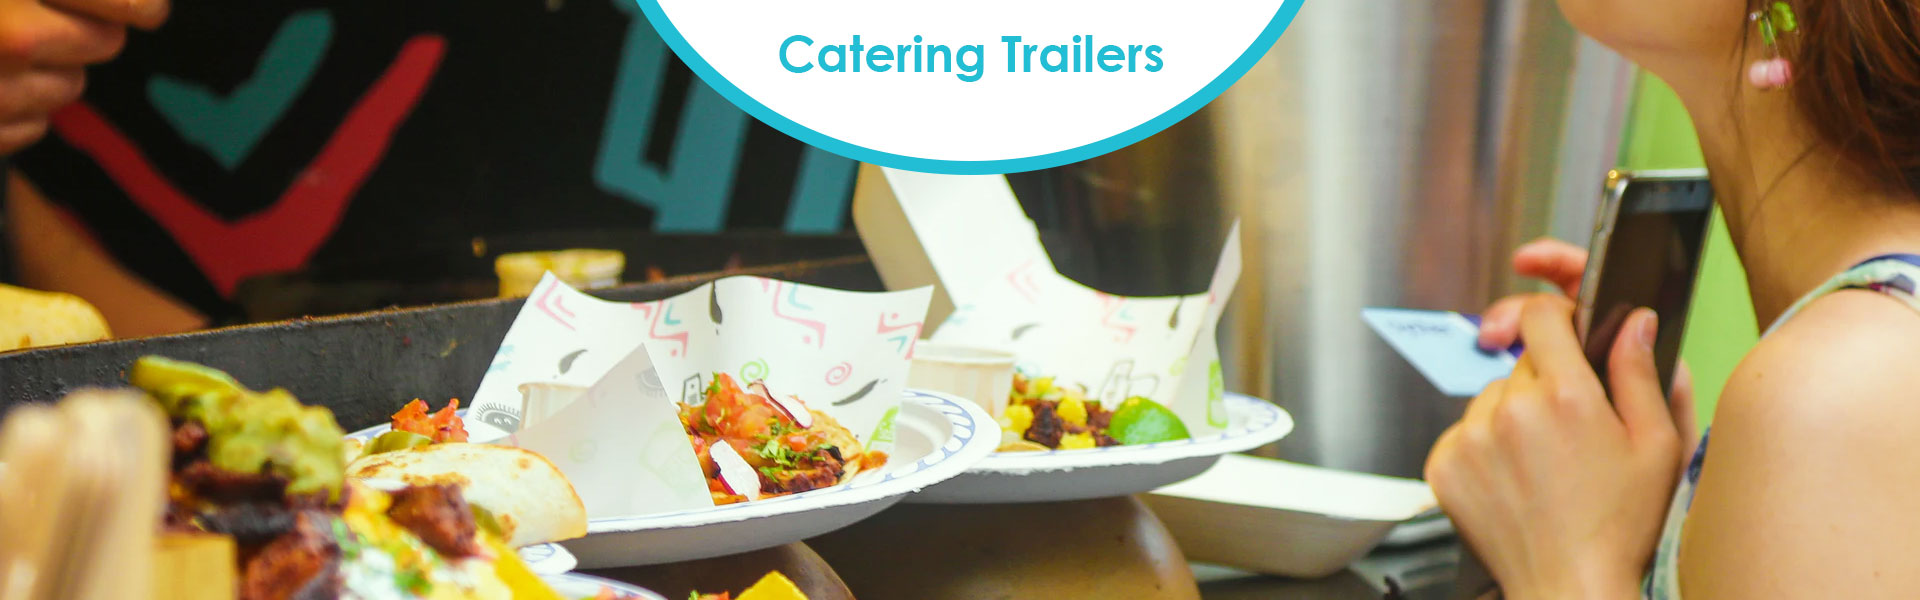 Catering-trailer-hire-catering-trailers-header